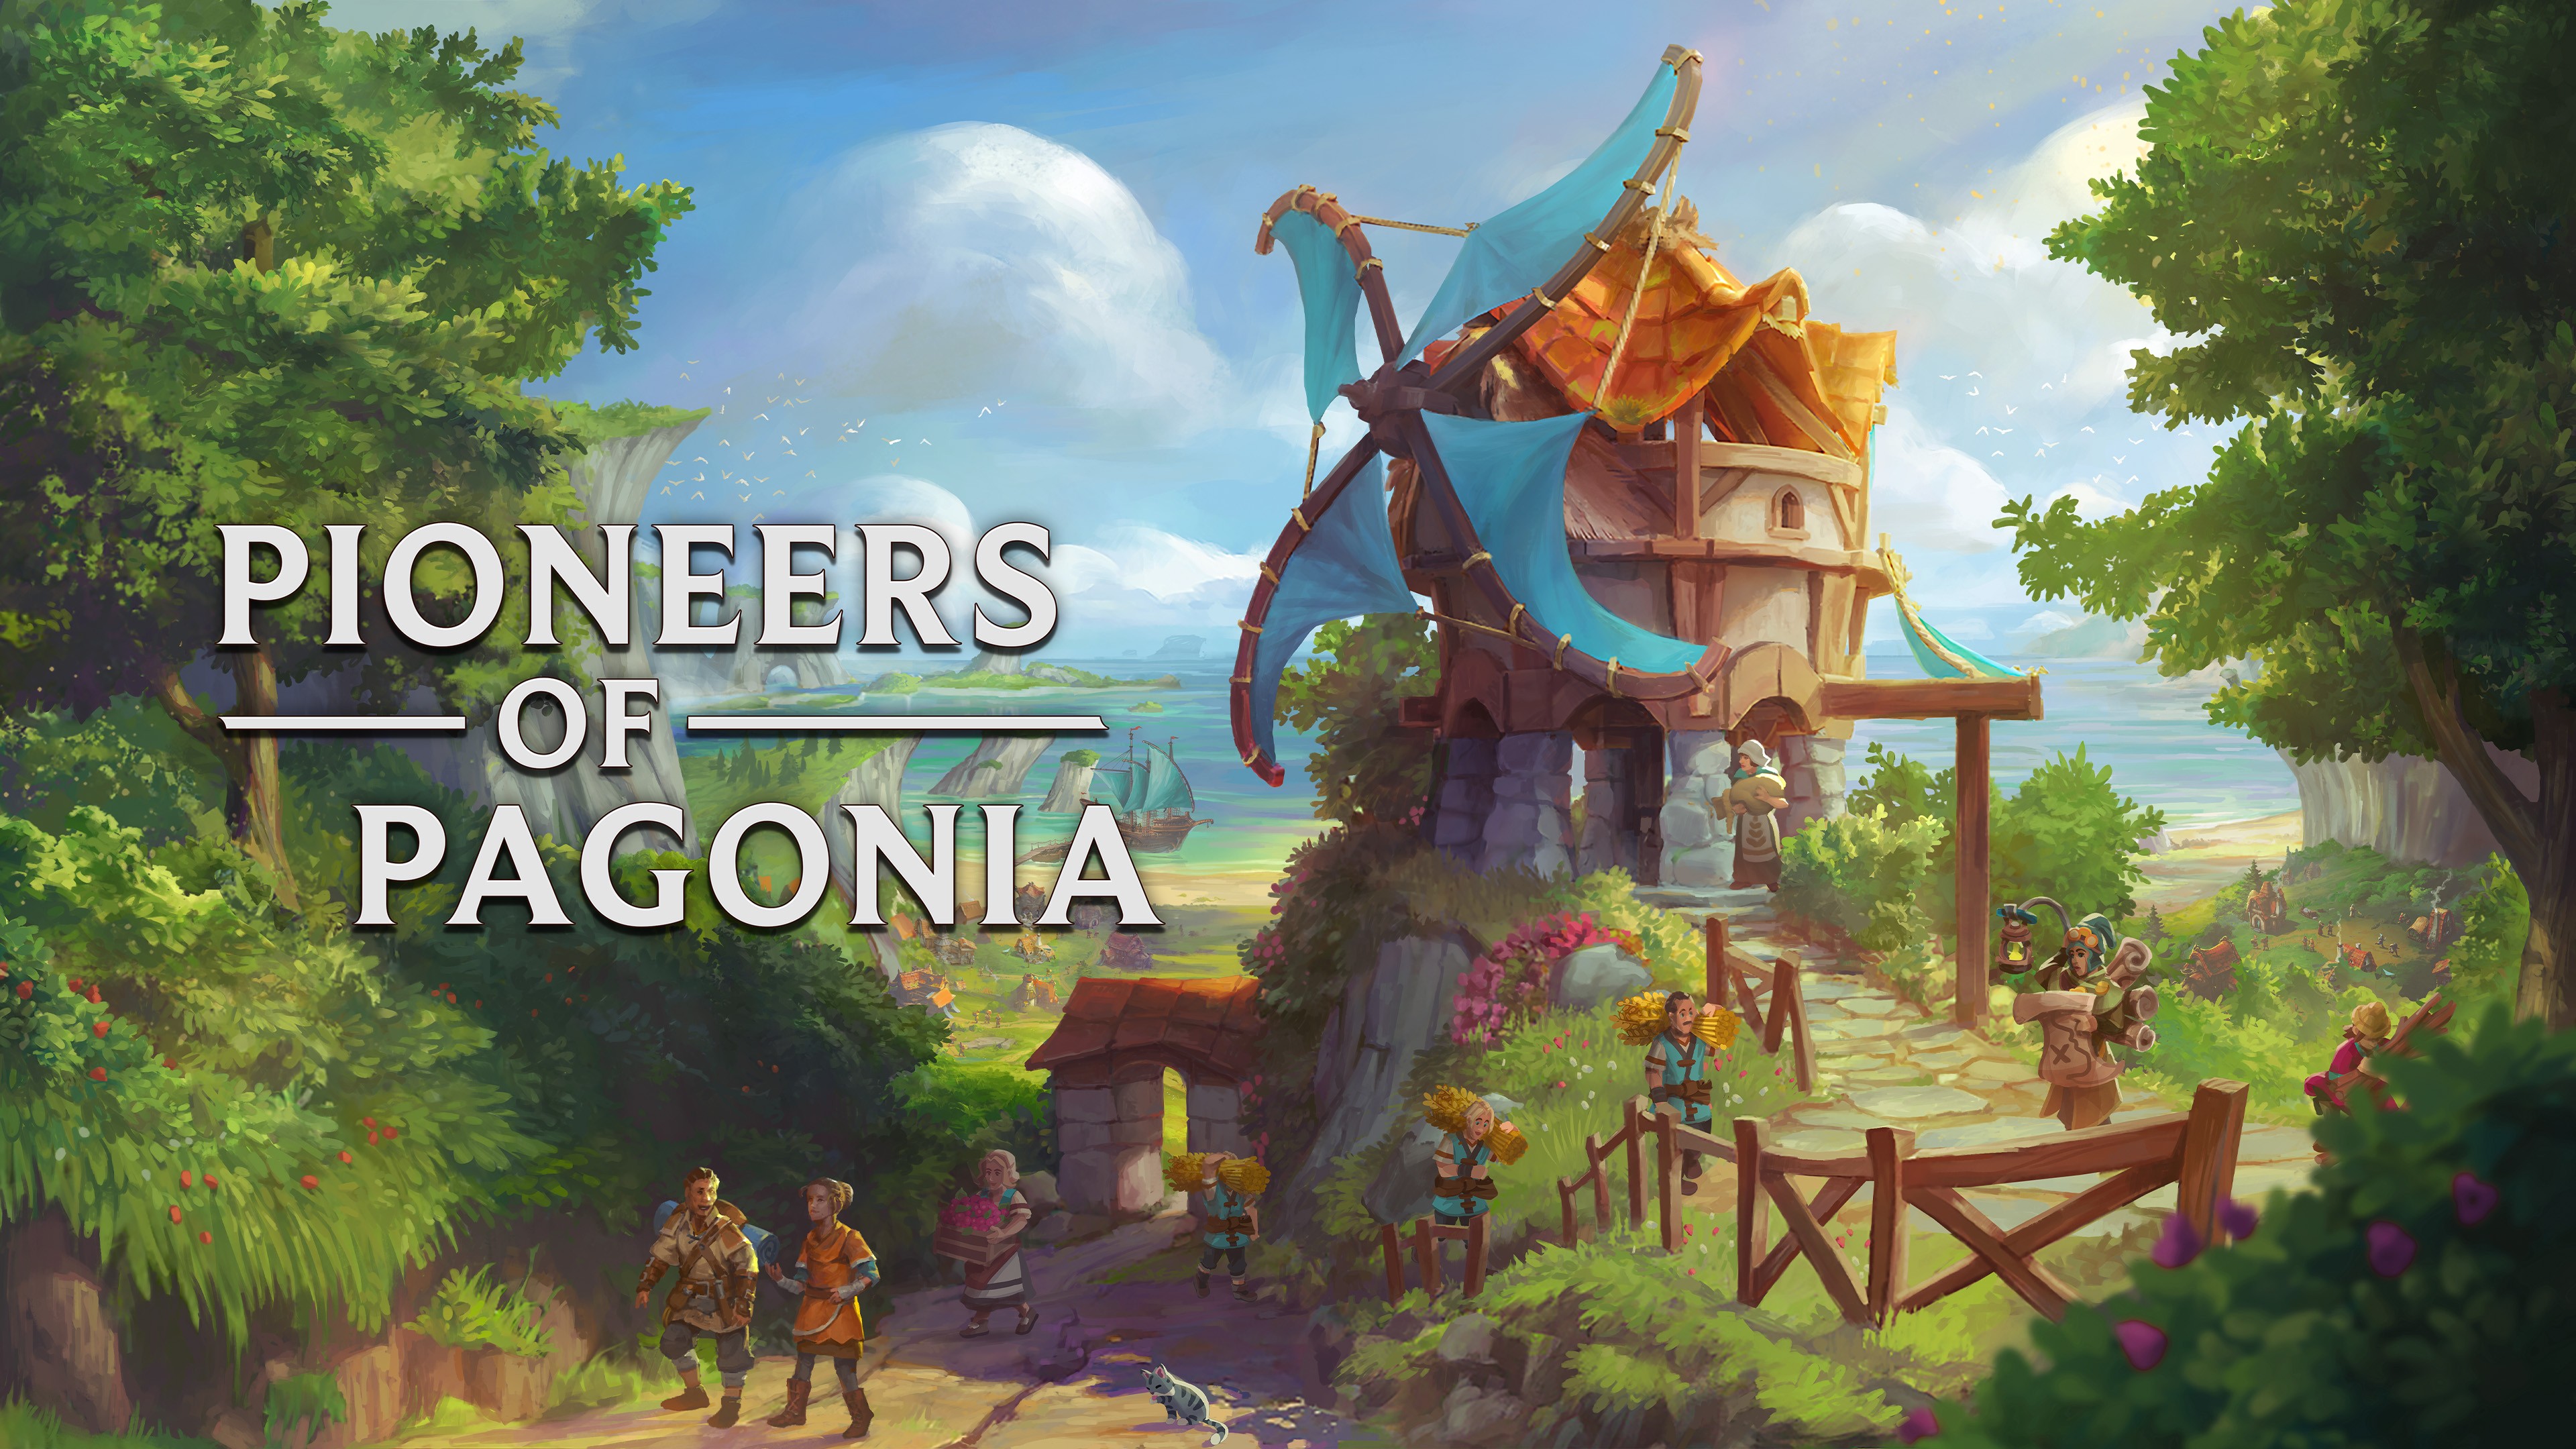 Pioneers of pagonia на русском. Pioneers of Pagonia. Pioneers of Pagonia PC. Scattered Tribes.